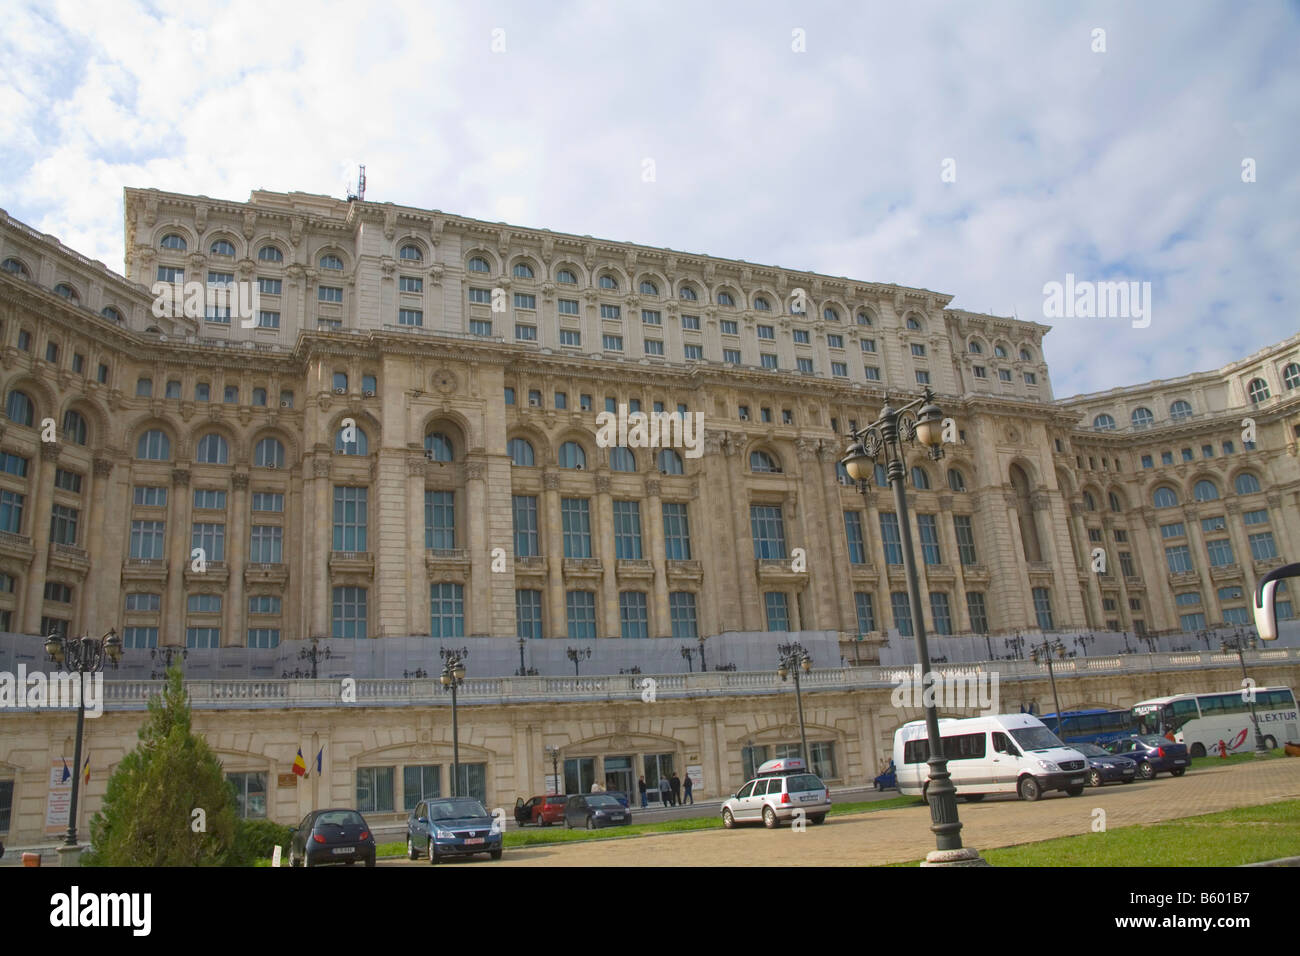 Bucharest Romania Europe The Casa Poporului House of the People started by Nicholae Ceausescu in 1984 most expensive administrative building in world Stock Photo